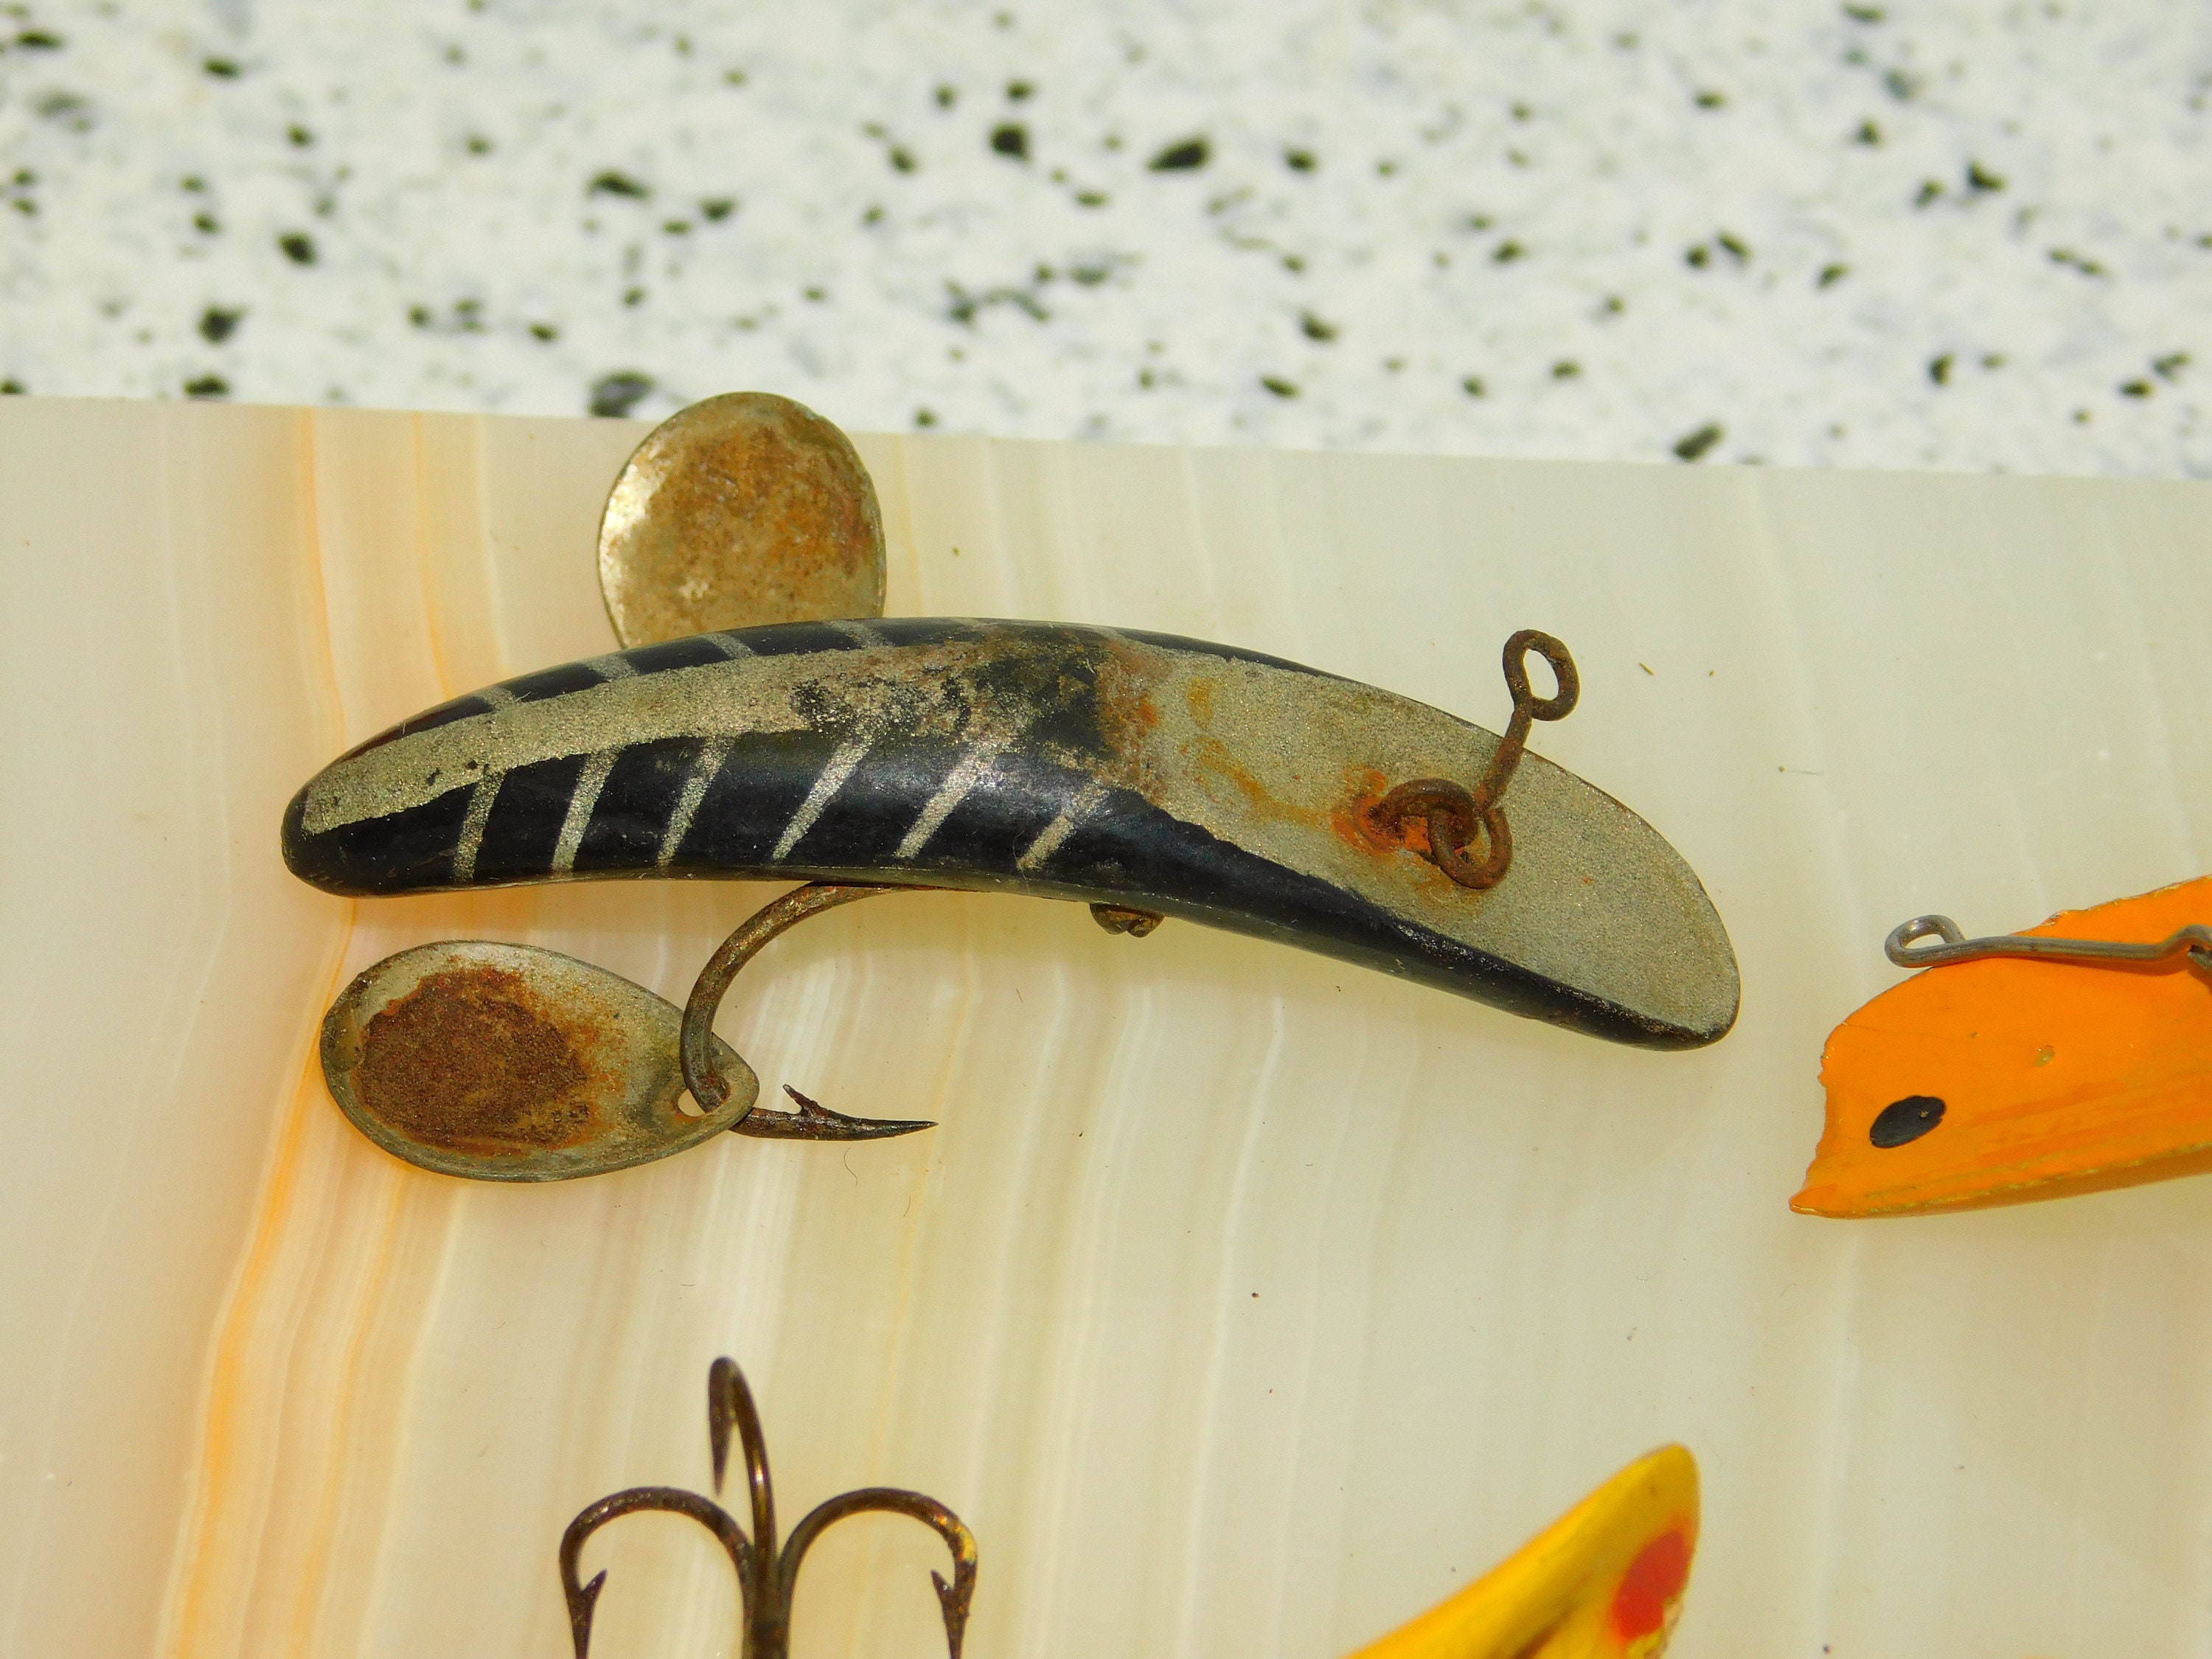 Lot Vintage Fishing Lures Helin Flatfish Fly Fishing Bait Wood Carved /  Bakelite Vintage Fishing Tackle Lot F5, F6, NO Boxes 